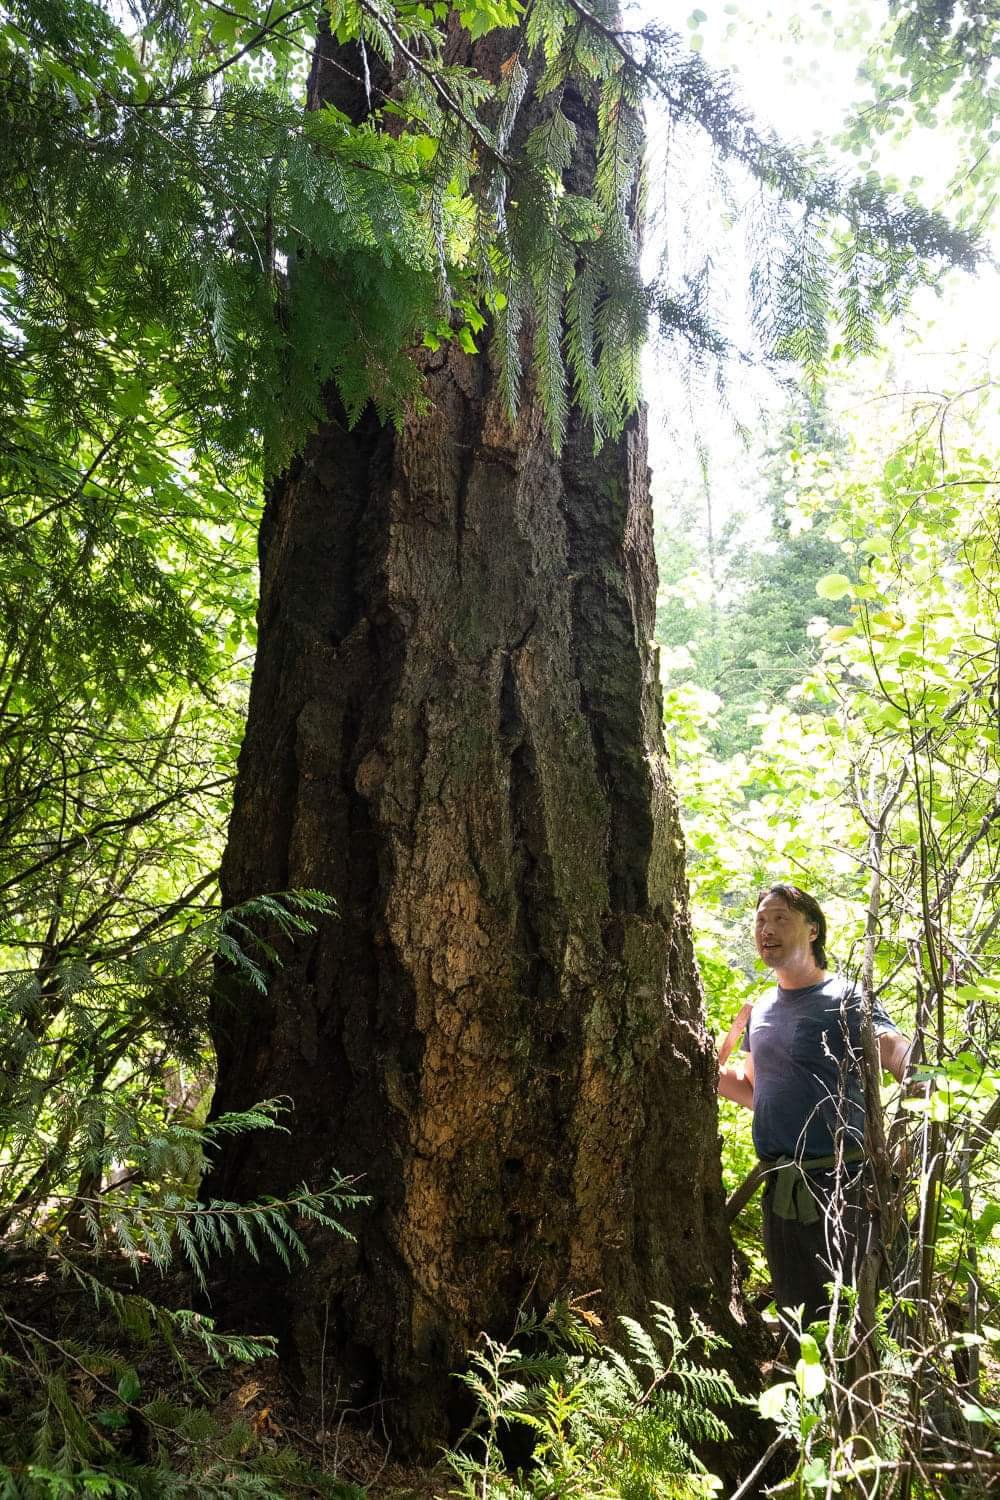  The largest old-growth Interior Douglas-fir with Ken Wu, co-founder of the Nature-Based Solutions Foundation, on the Old Man Jack property, a privately-owned old-growth forest newly acquired by the Nature-Based Solutions Foundation for conservation 